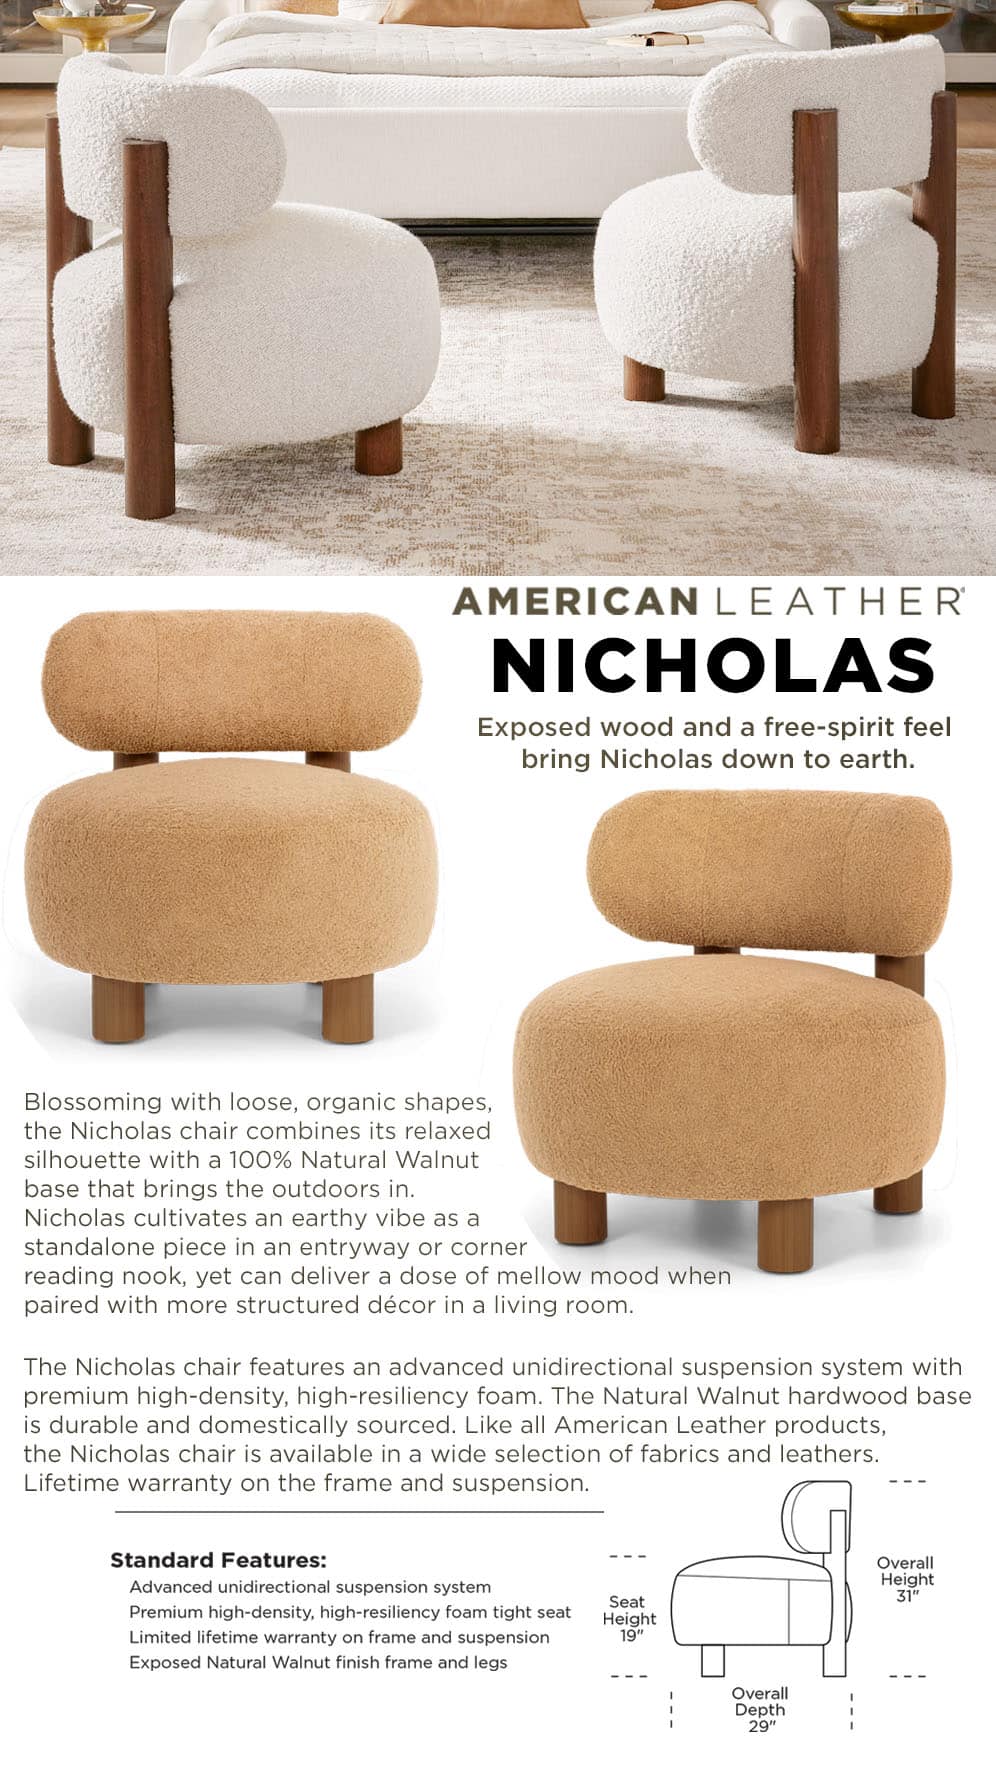 American Leather Nicholas Chair Features & Dimensions - Exposed wood and a free-spirit feel bring Nicholas down to Earth